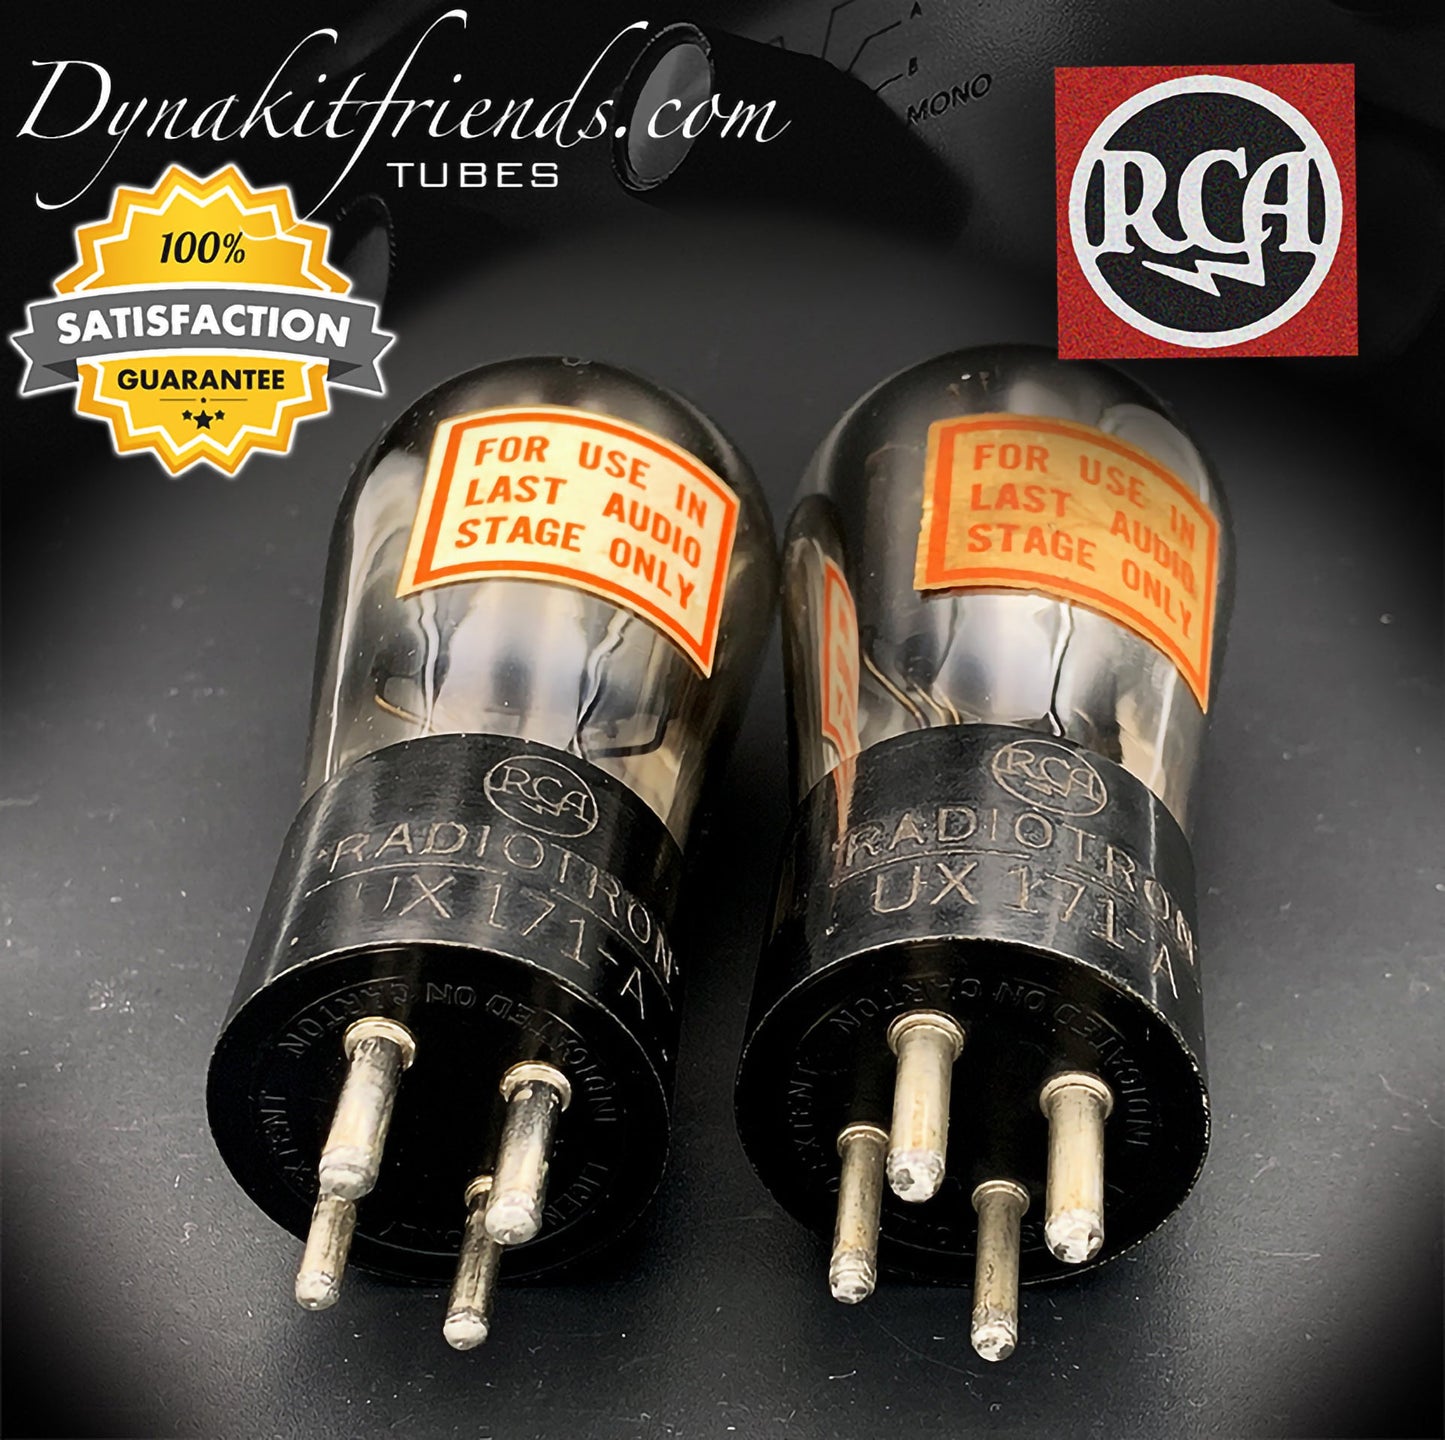 UX171A (71A) RCA NOS Globe Power Triode Matched Pair Tubes Made in USA 1928